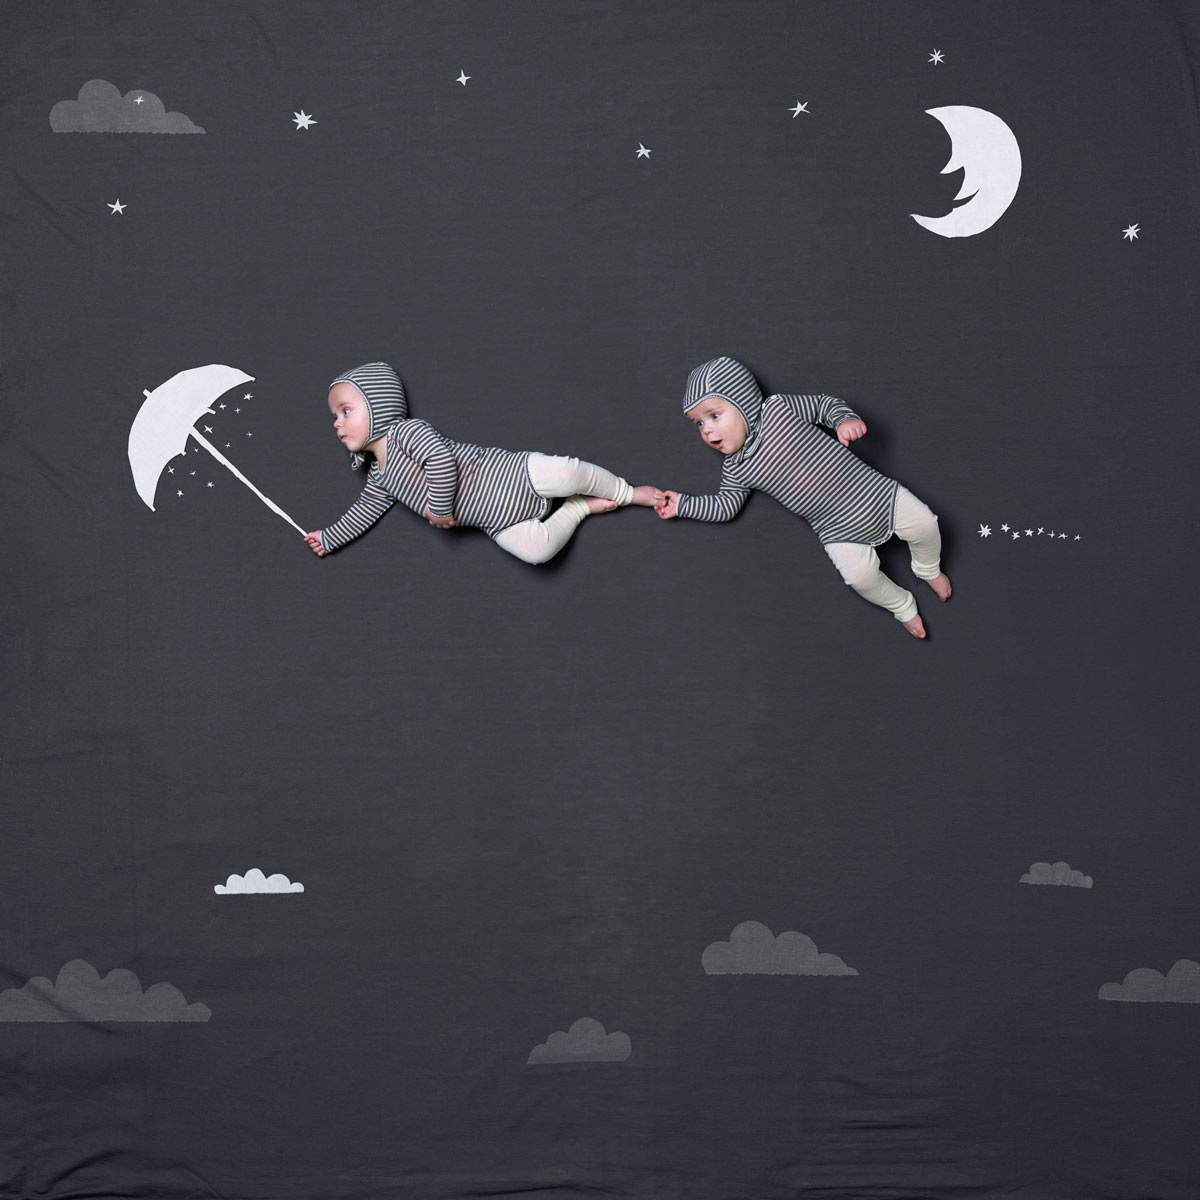 Twin boys in a magical world, flying in the air after an umbrella. Advertising for Norwegian wool brand Lilli Leopold by håvard schei